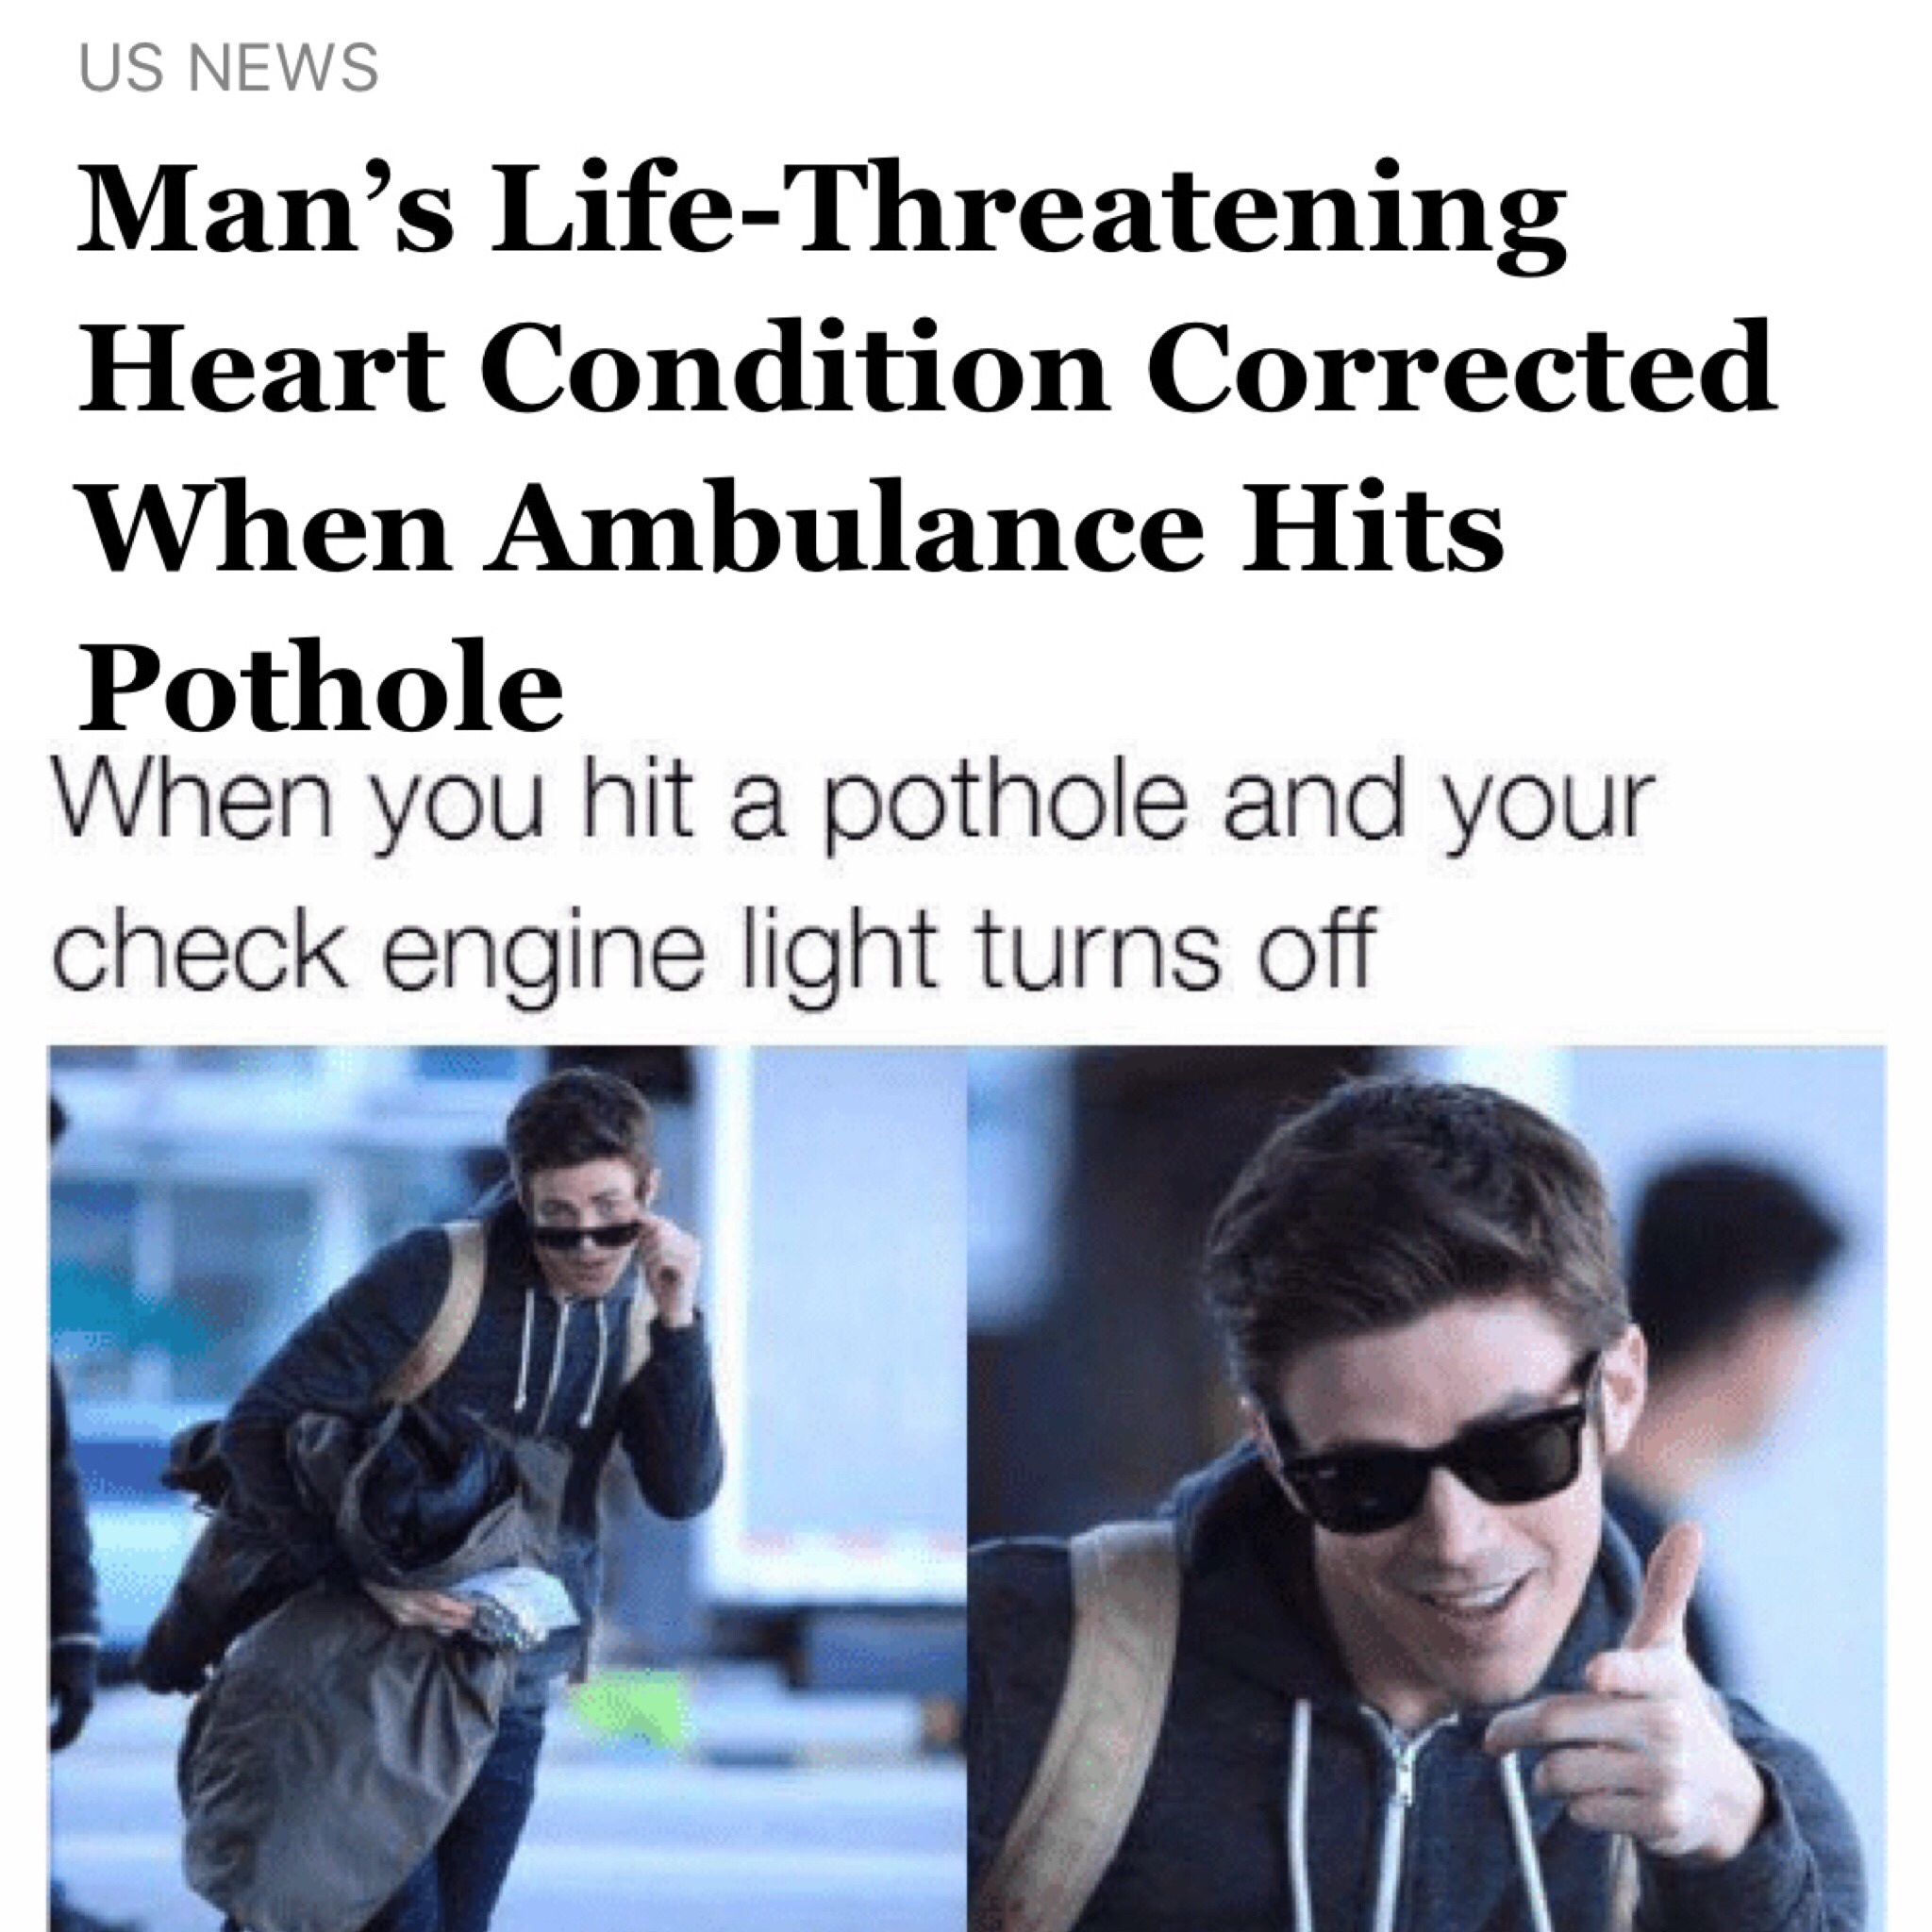 Random Pics - grant gustin meme - Us News Man's LifeThreatening Heart Condition Corrected When Ambulance Hits Pothole When you hit a pothole and your check engine light turns off